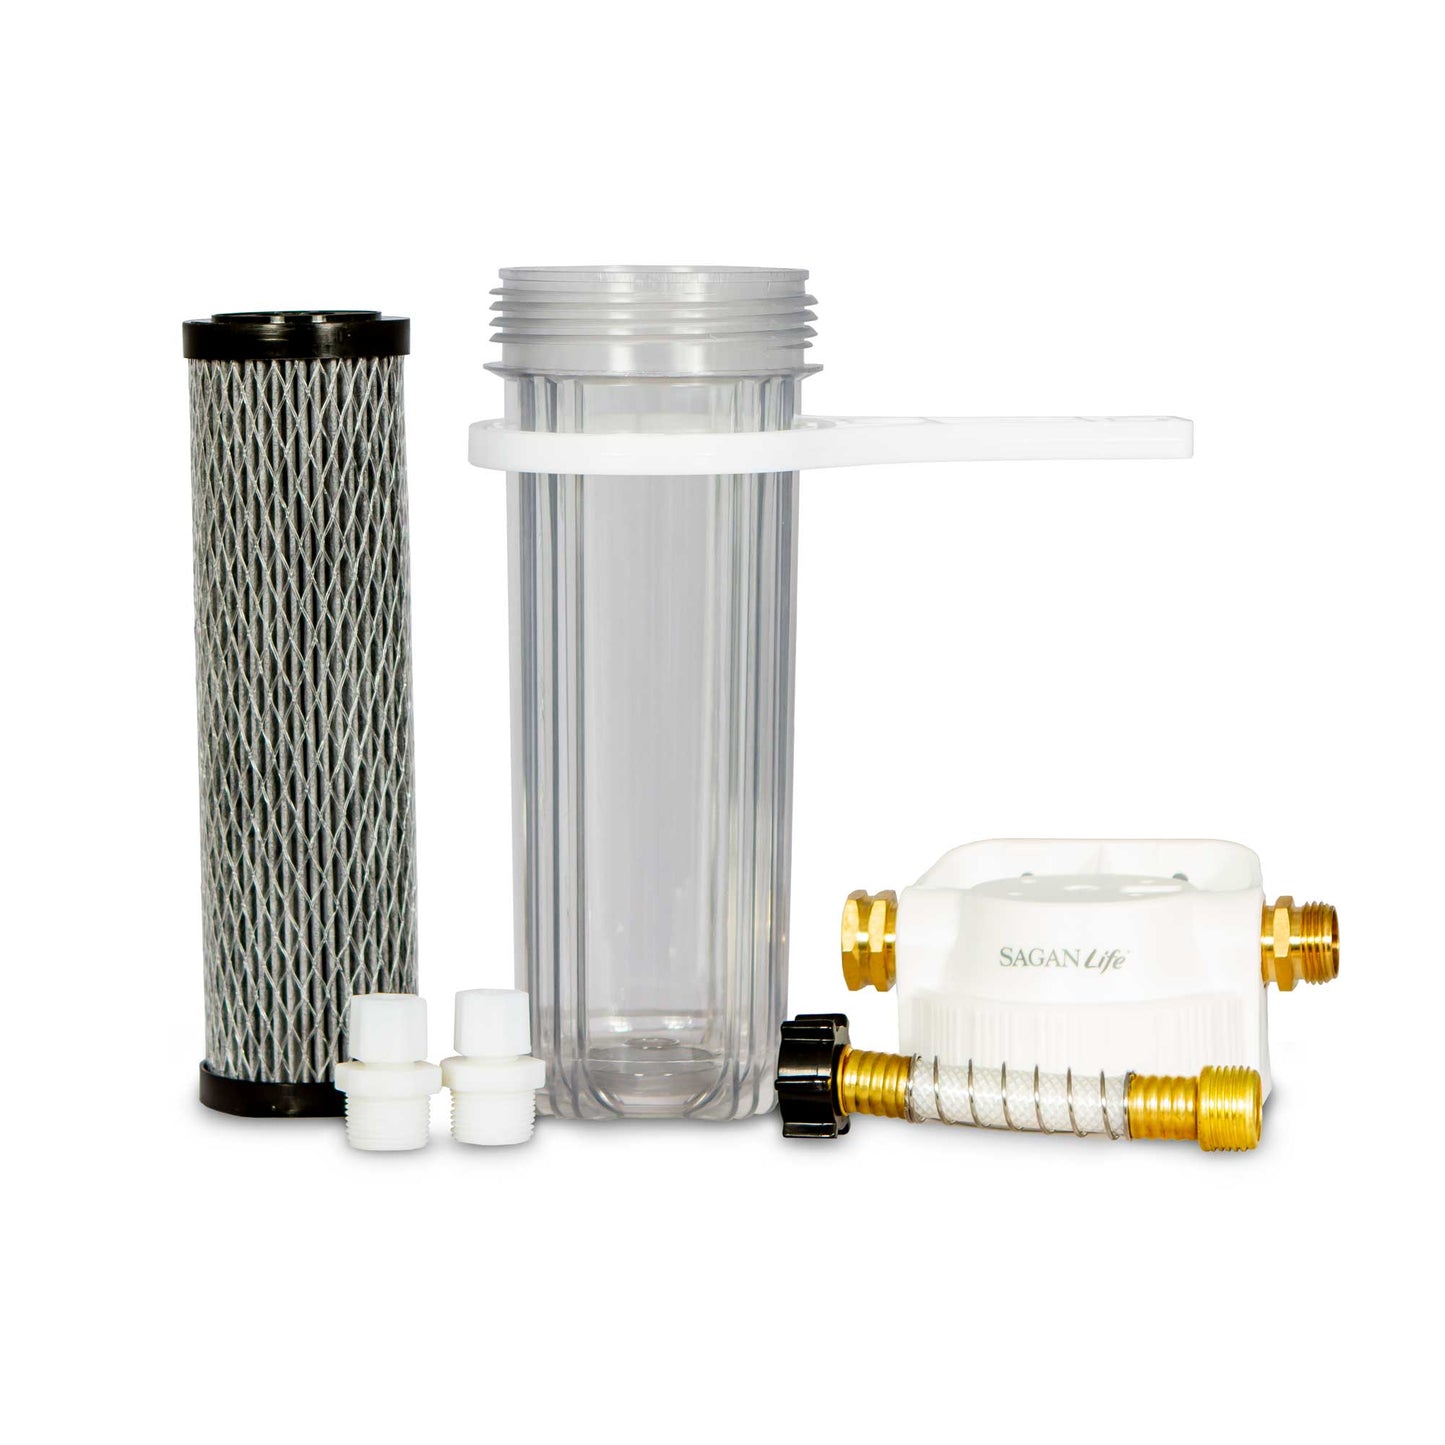 RV Water Filter Kit – Best Water Purification for RV’s, Motorhomes and Campers